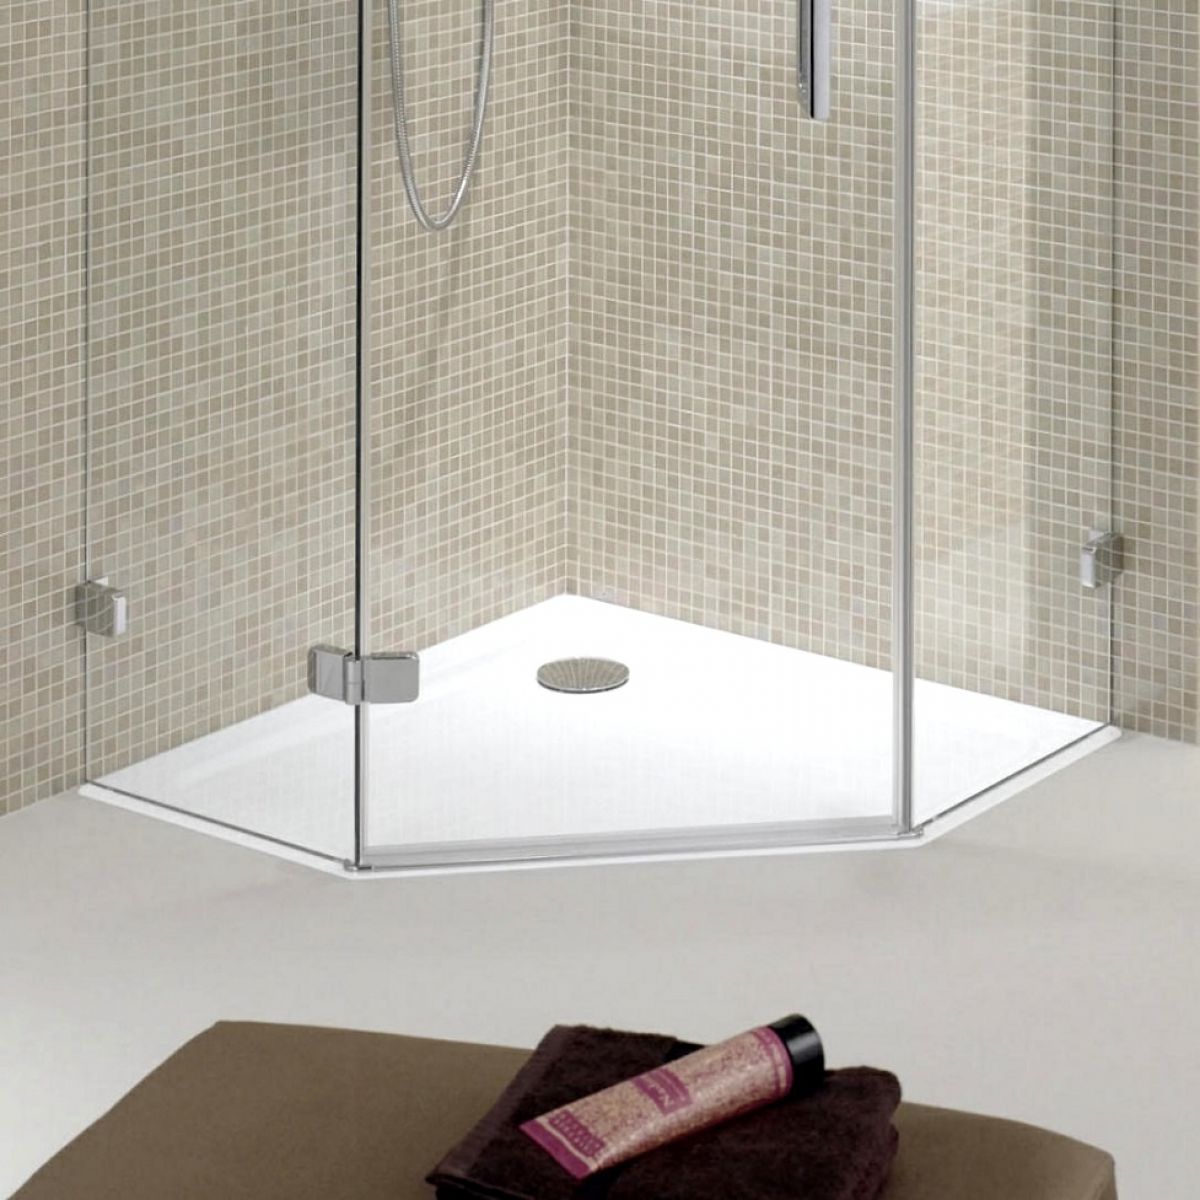 picture of a square shower tray